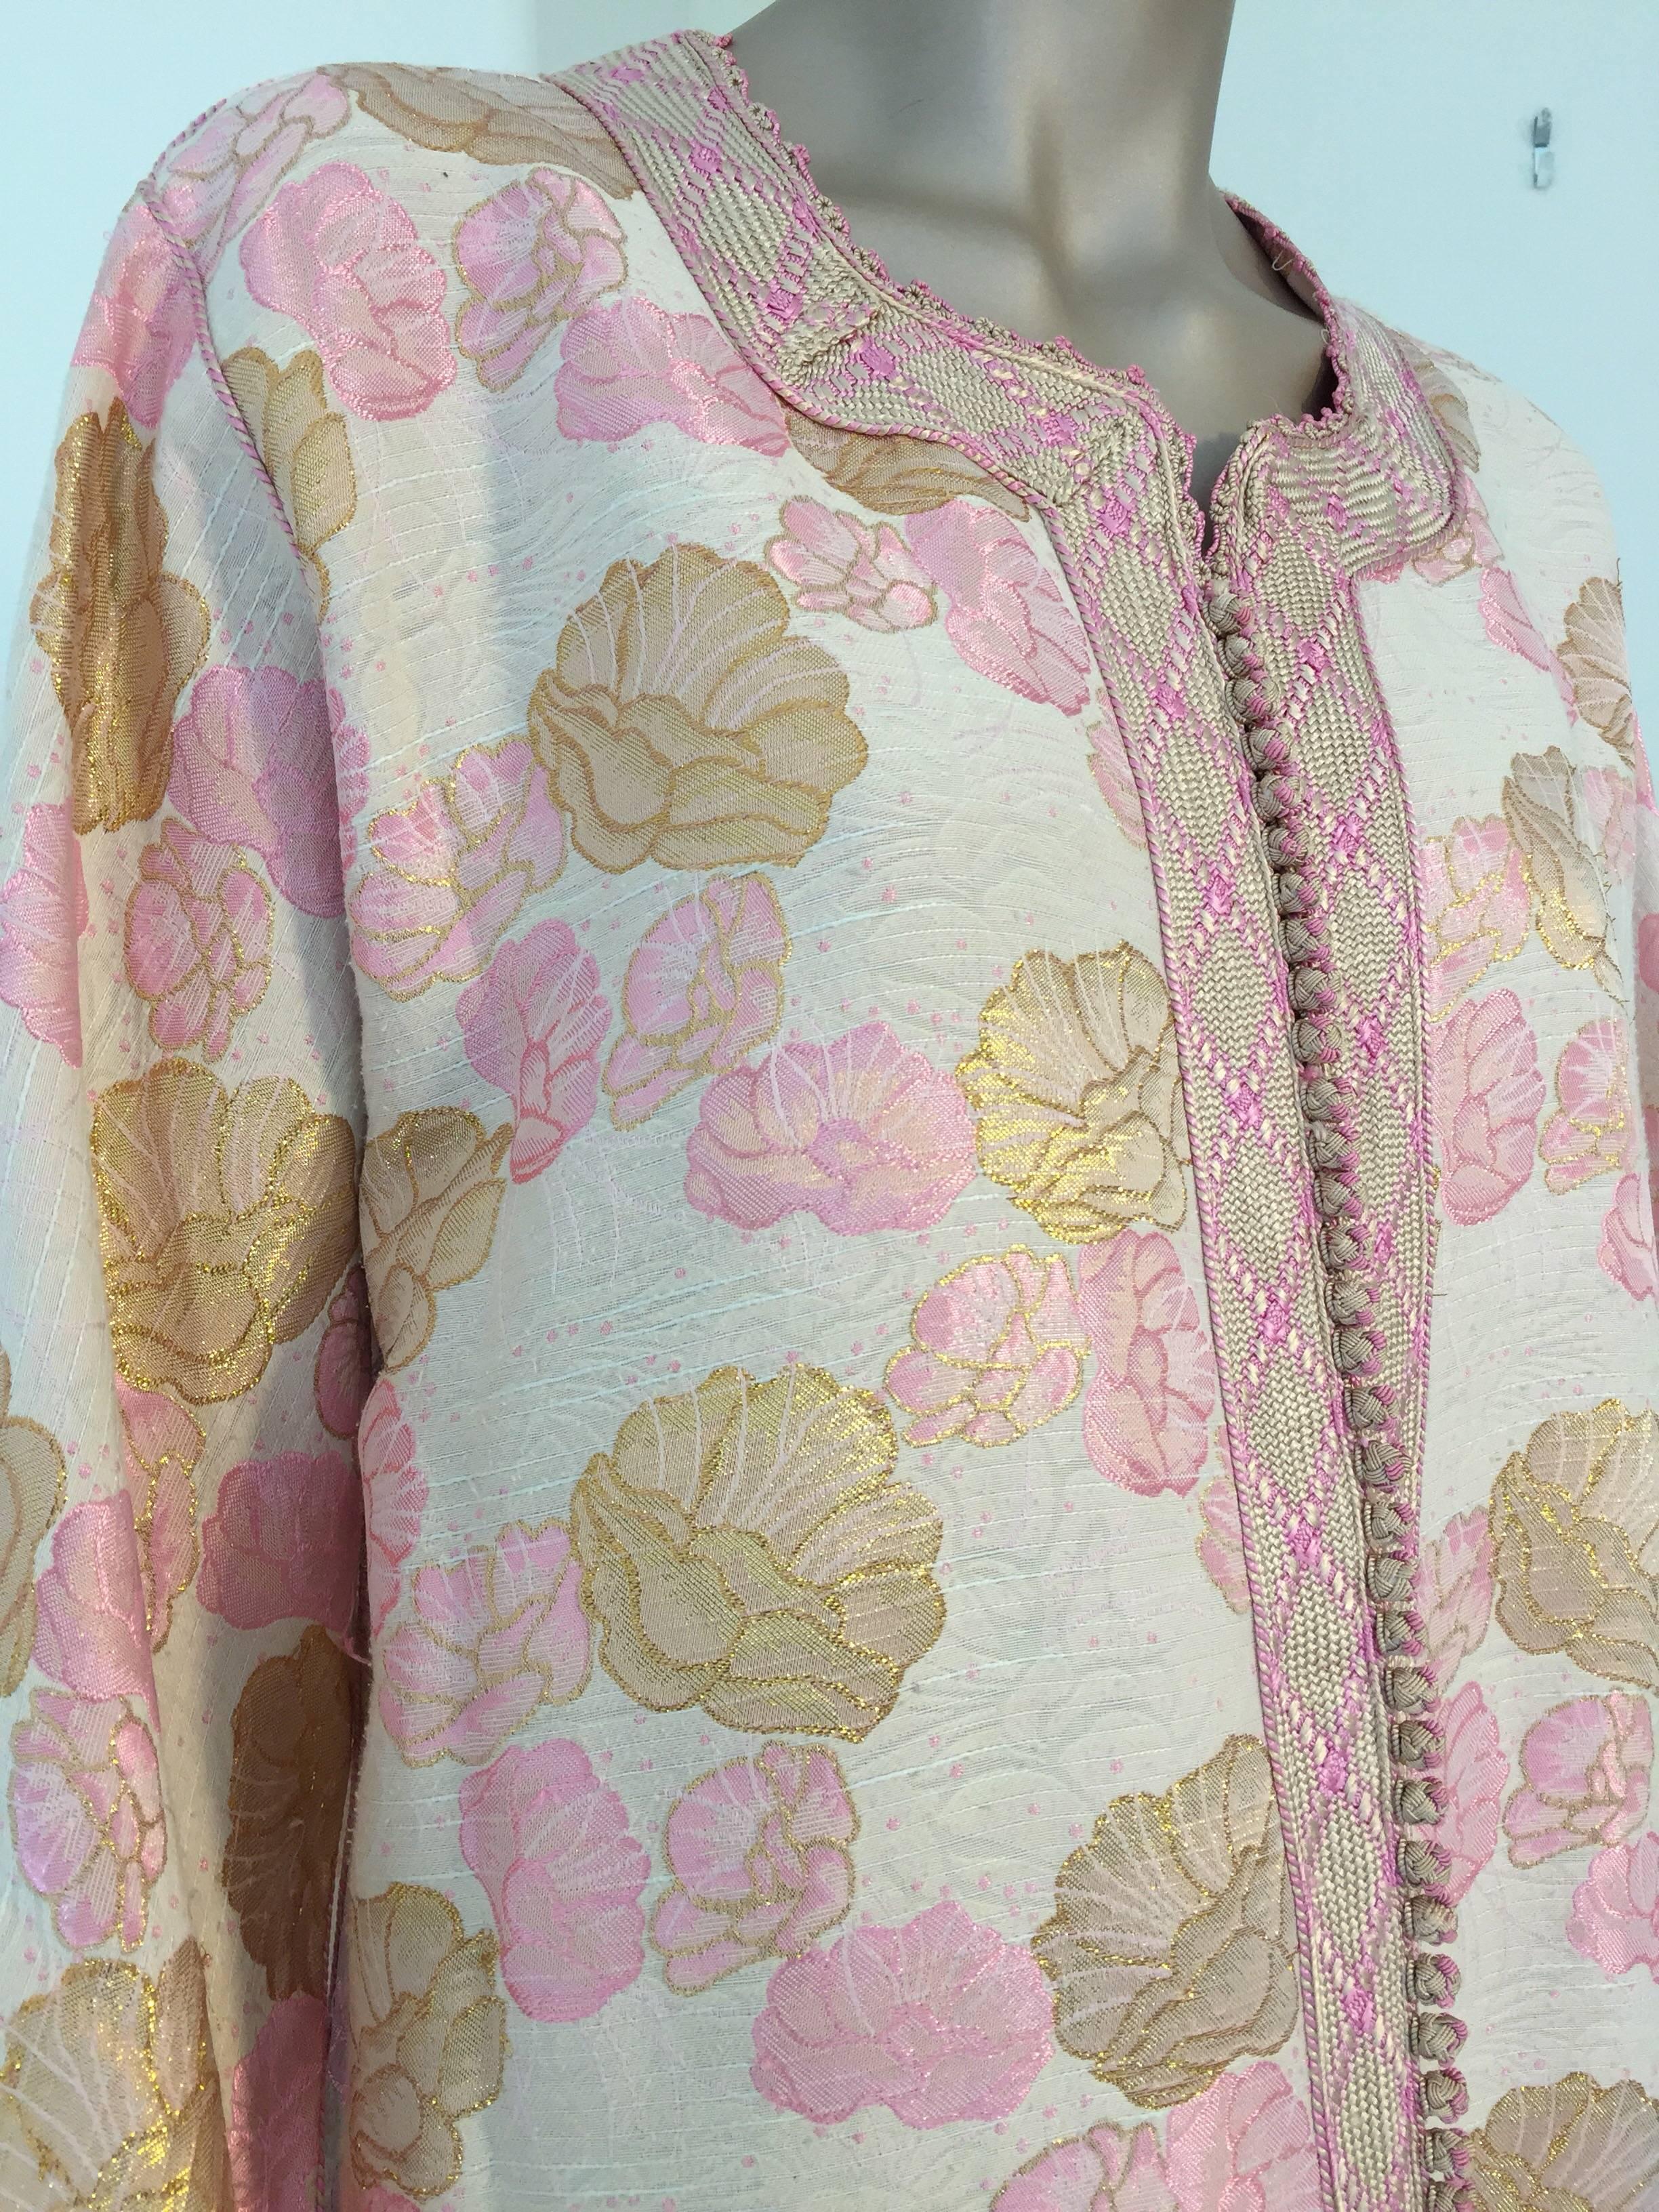 20th Century Moroccan Vintage Kaftan Embroidered Maxi Dress Brocade Caftan Pink and Gold